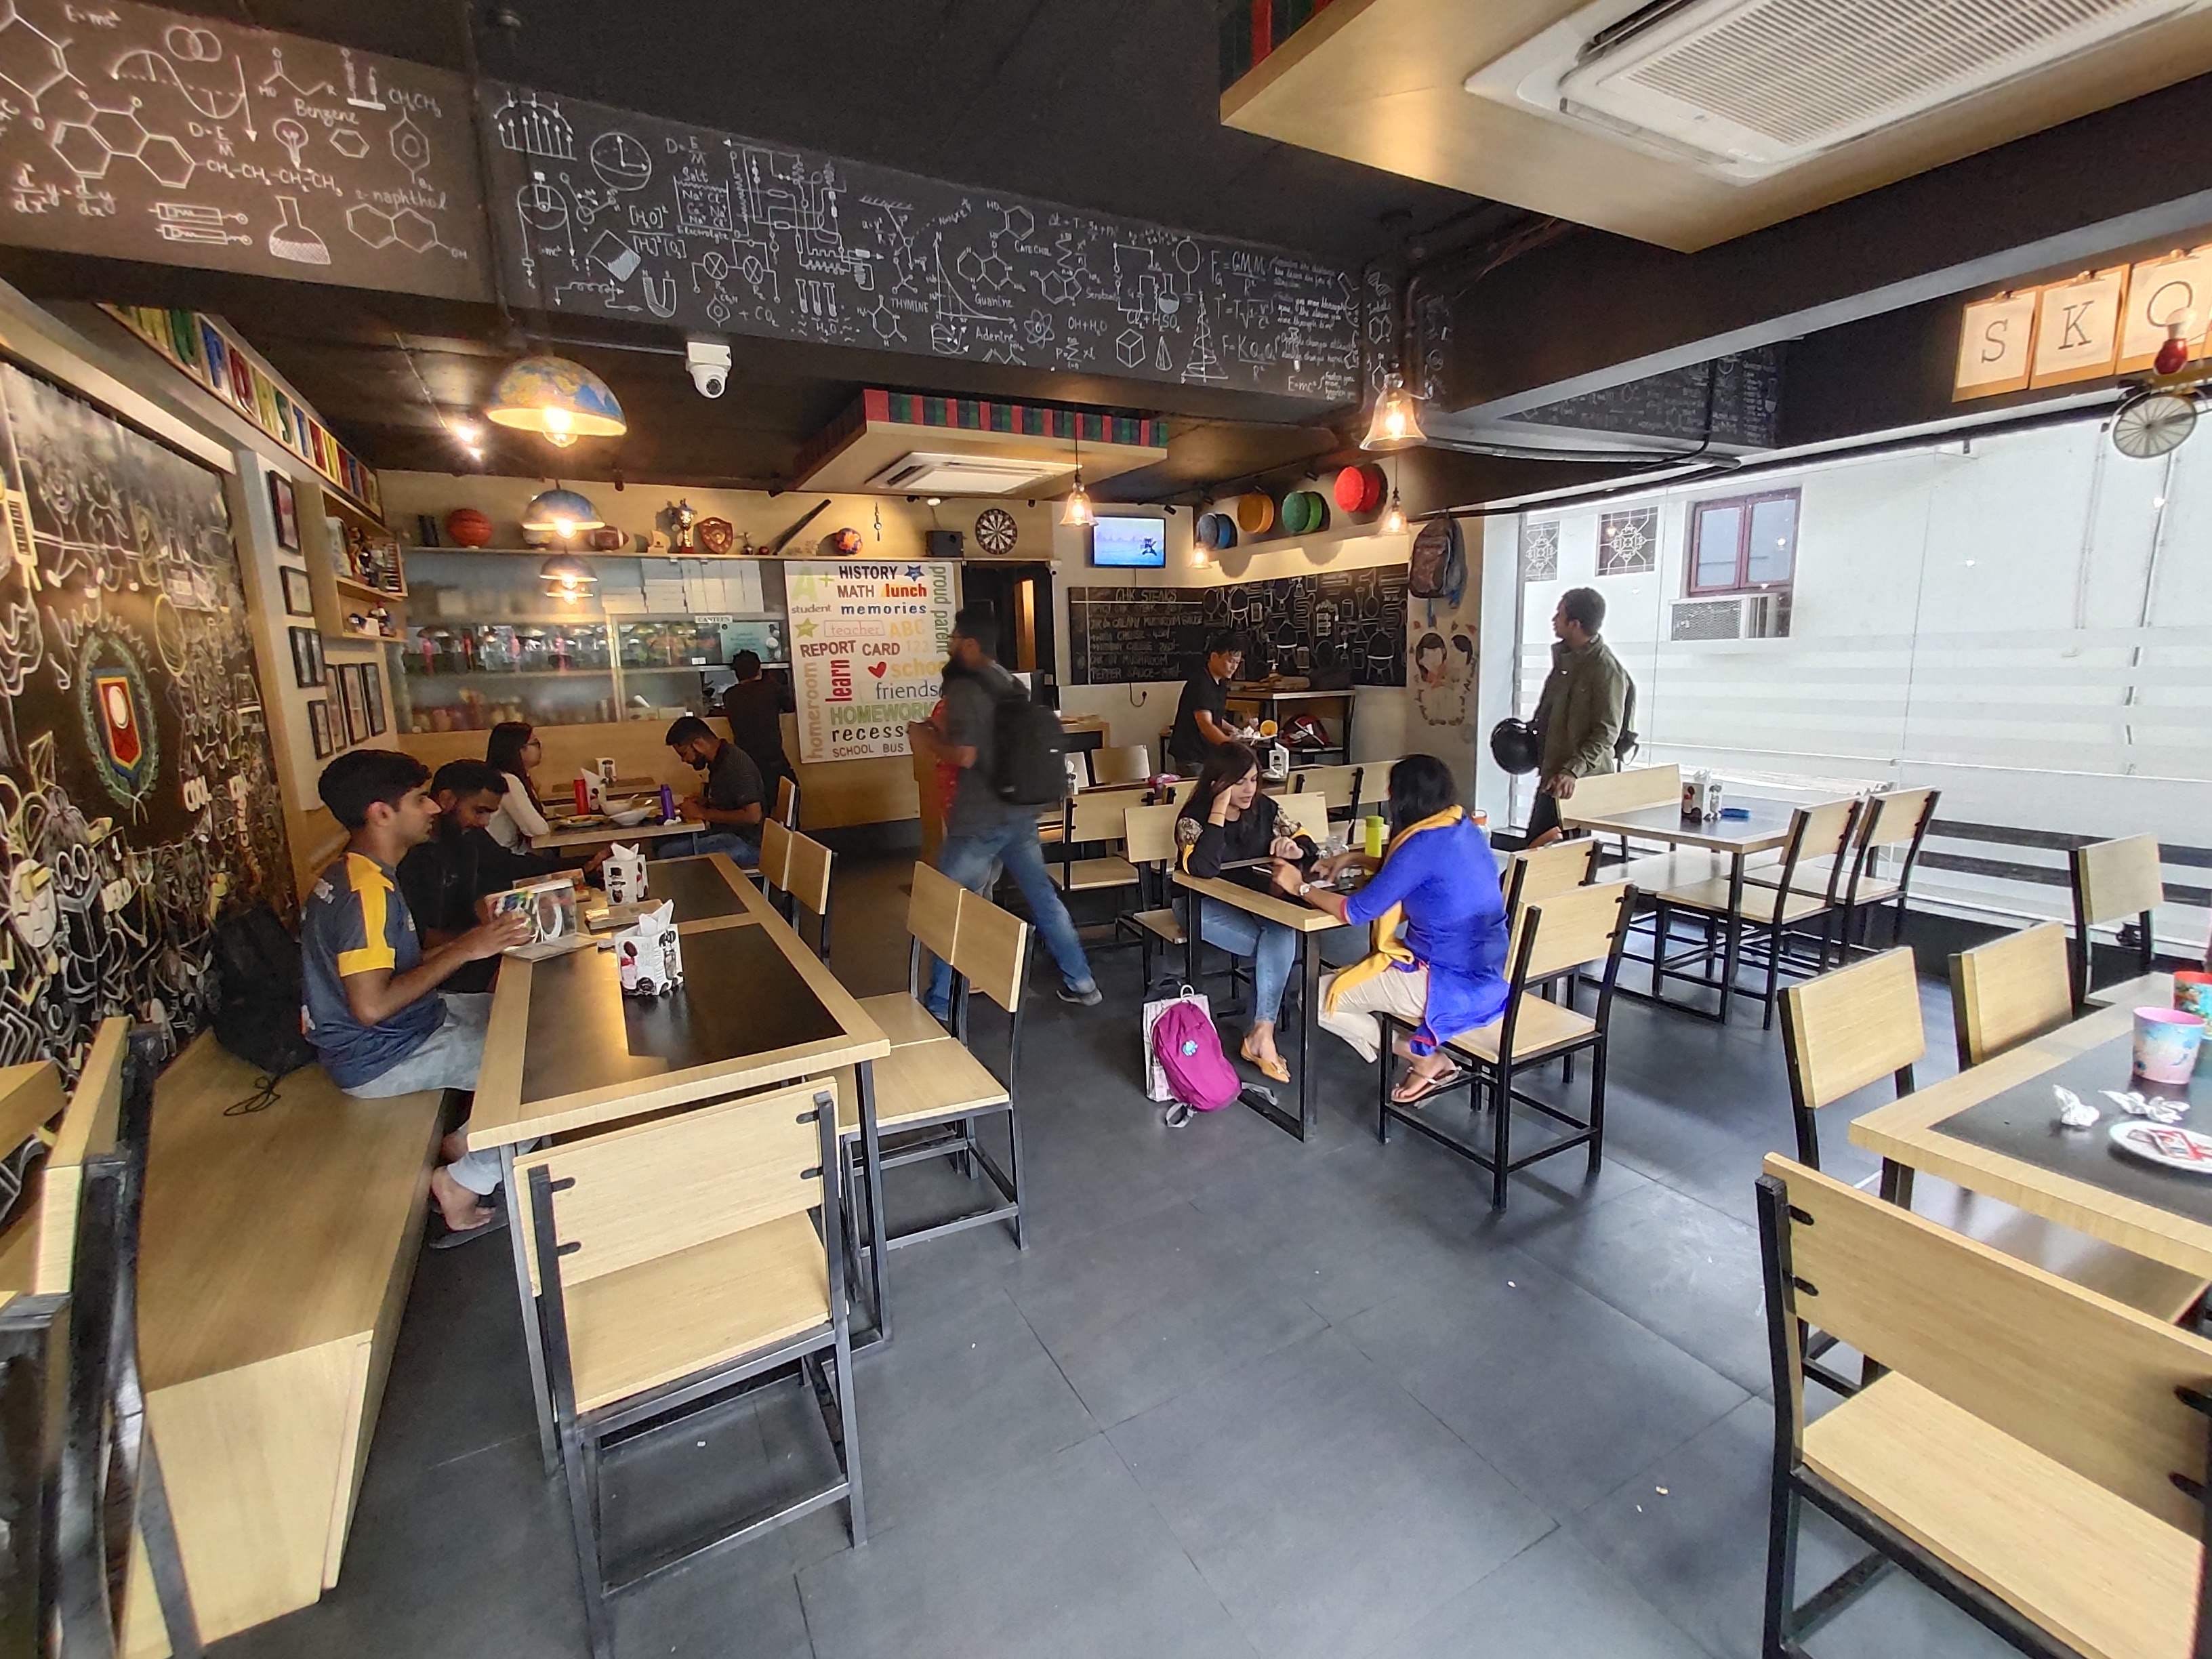 Back To School? This Classroom Themed Cafe Will Make You Nostalgic! | LBB